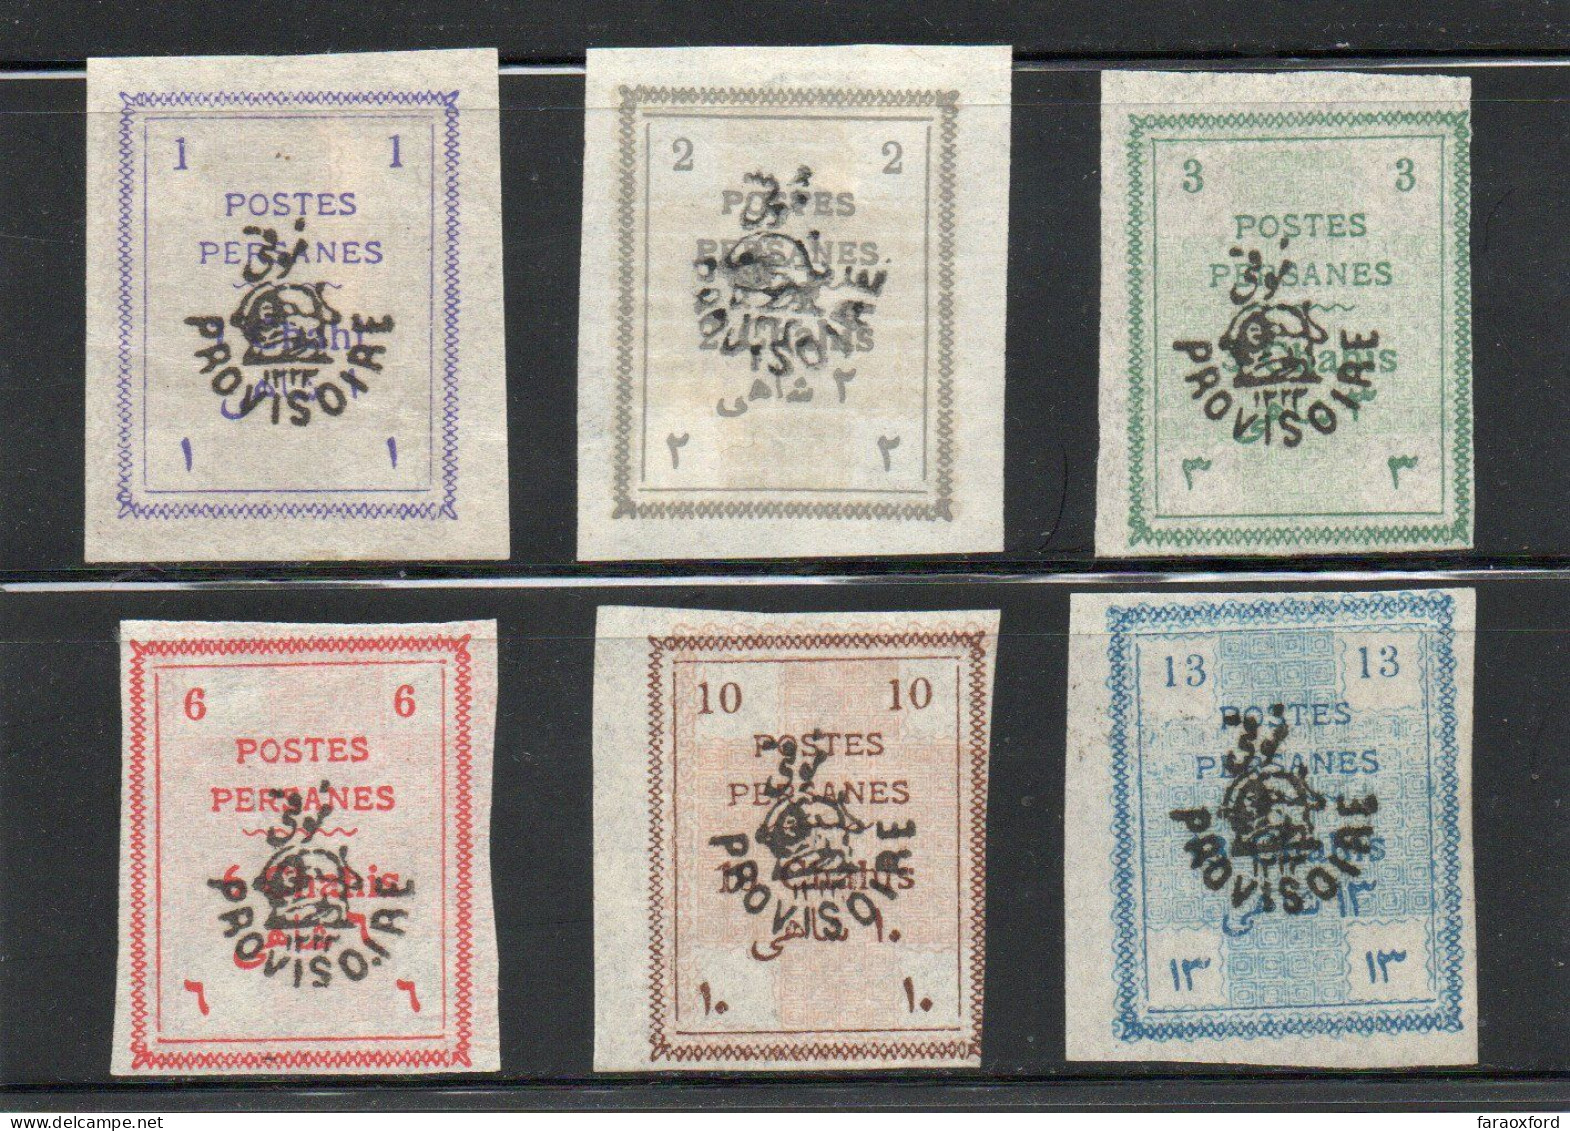 IRAN - ايران - PERSIA - 1906 - LIONS WITH PROVISOIRE OVERPRINTS - COMPLETE SET OF STAMPS - VERY GOOD MINT - Iran